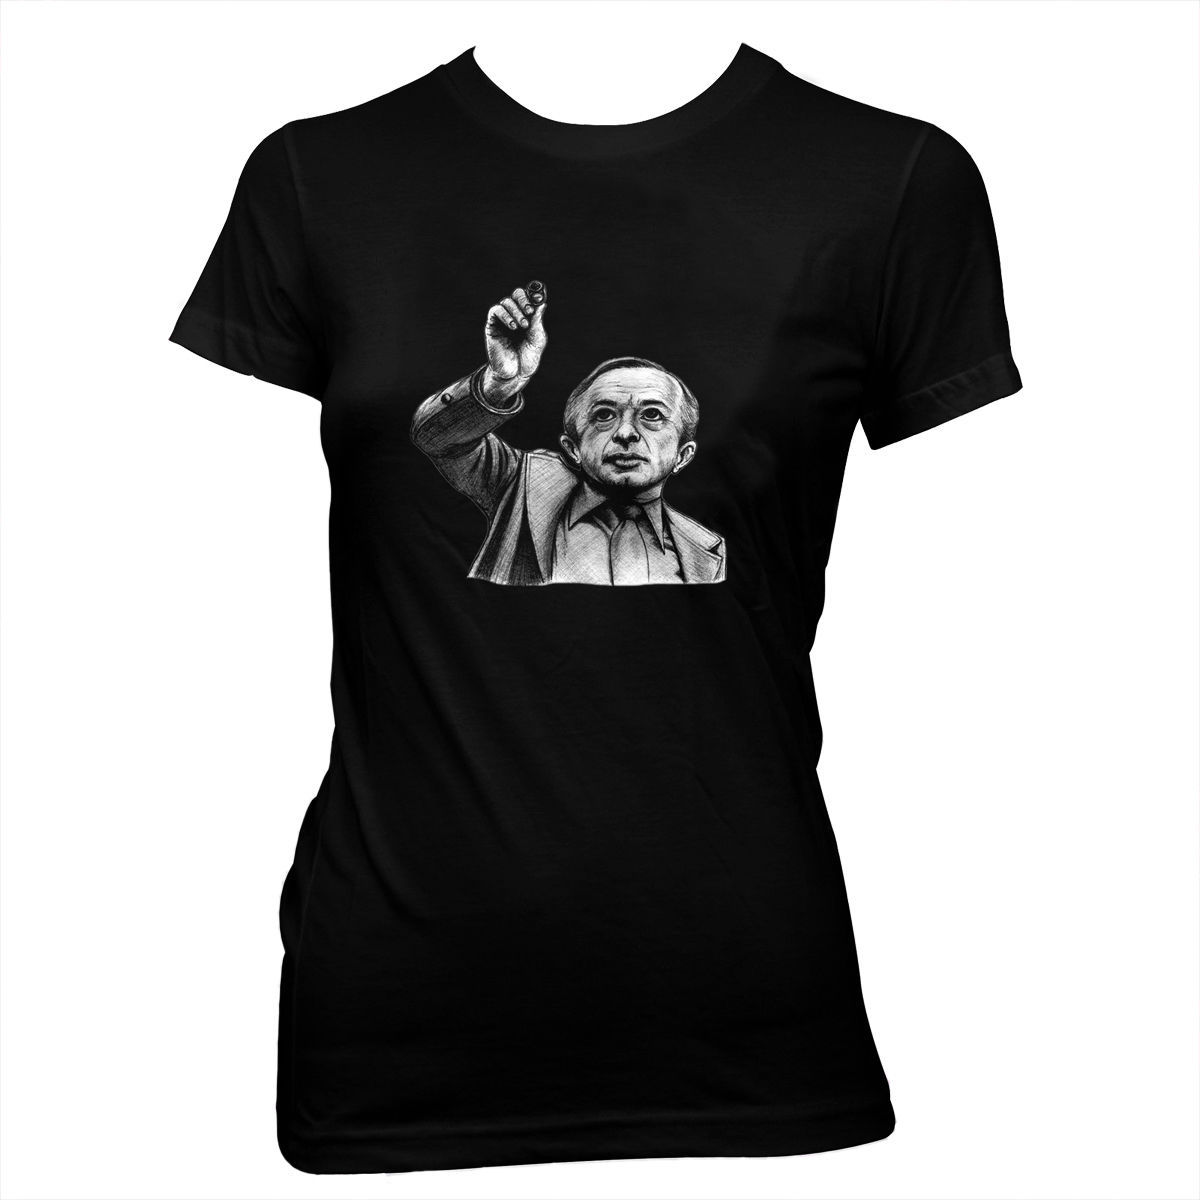 The Man From Another Place - David Lynch Twin Peaks Women's 100% cotton t-shirt